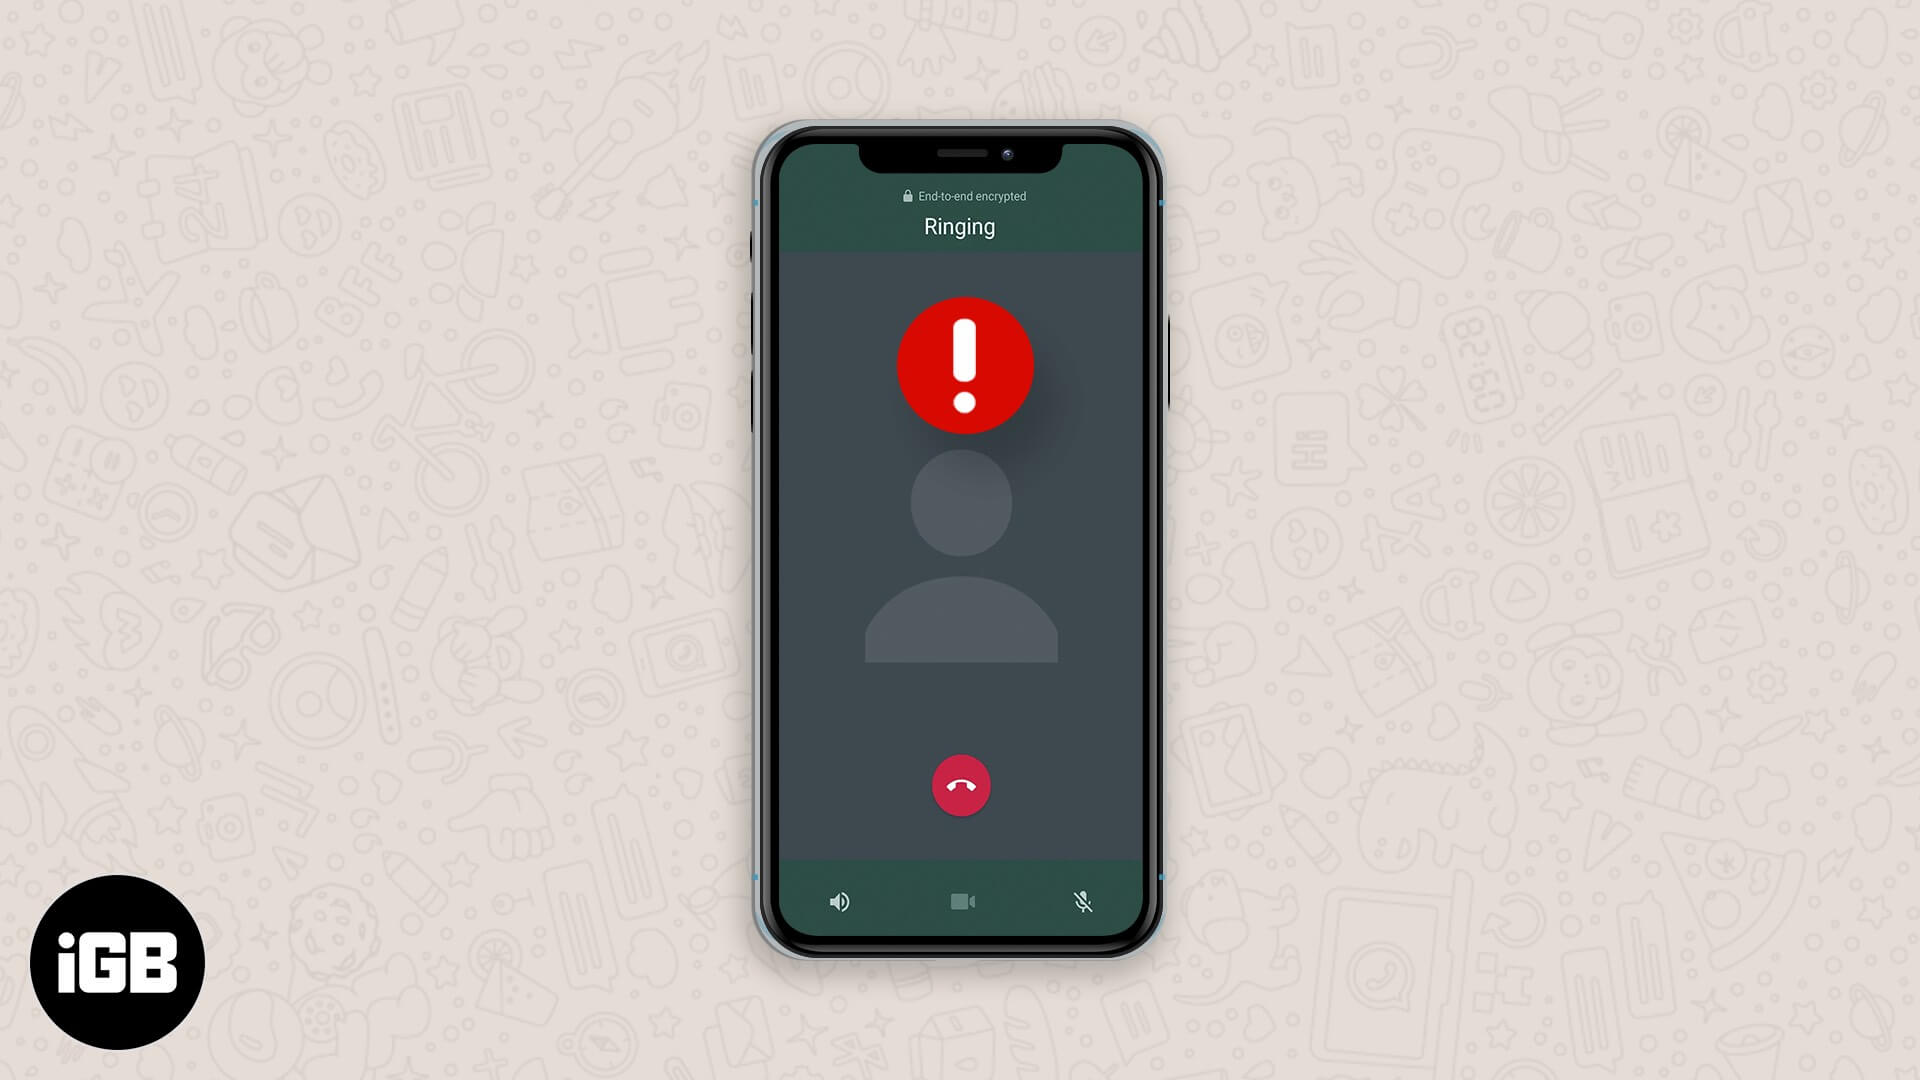 Solved] Fix WhatsApp Calls Not Working Issues on iPhone and Android